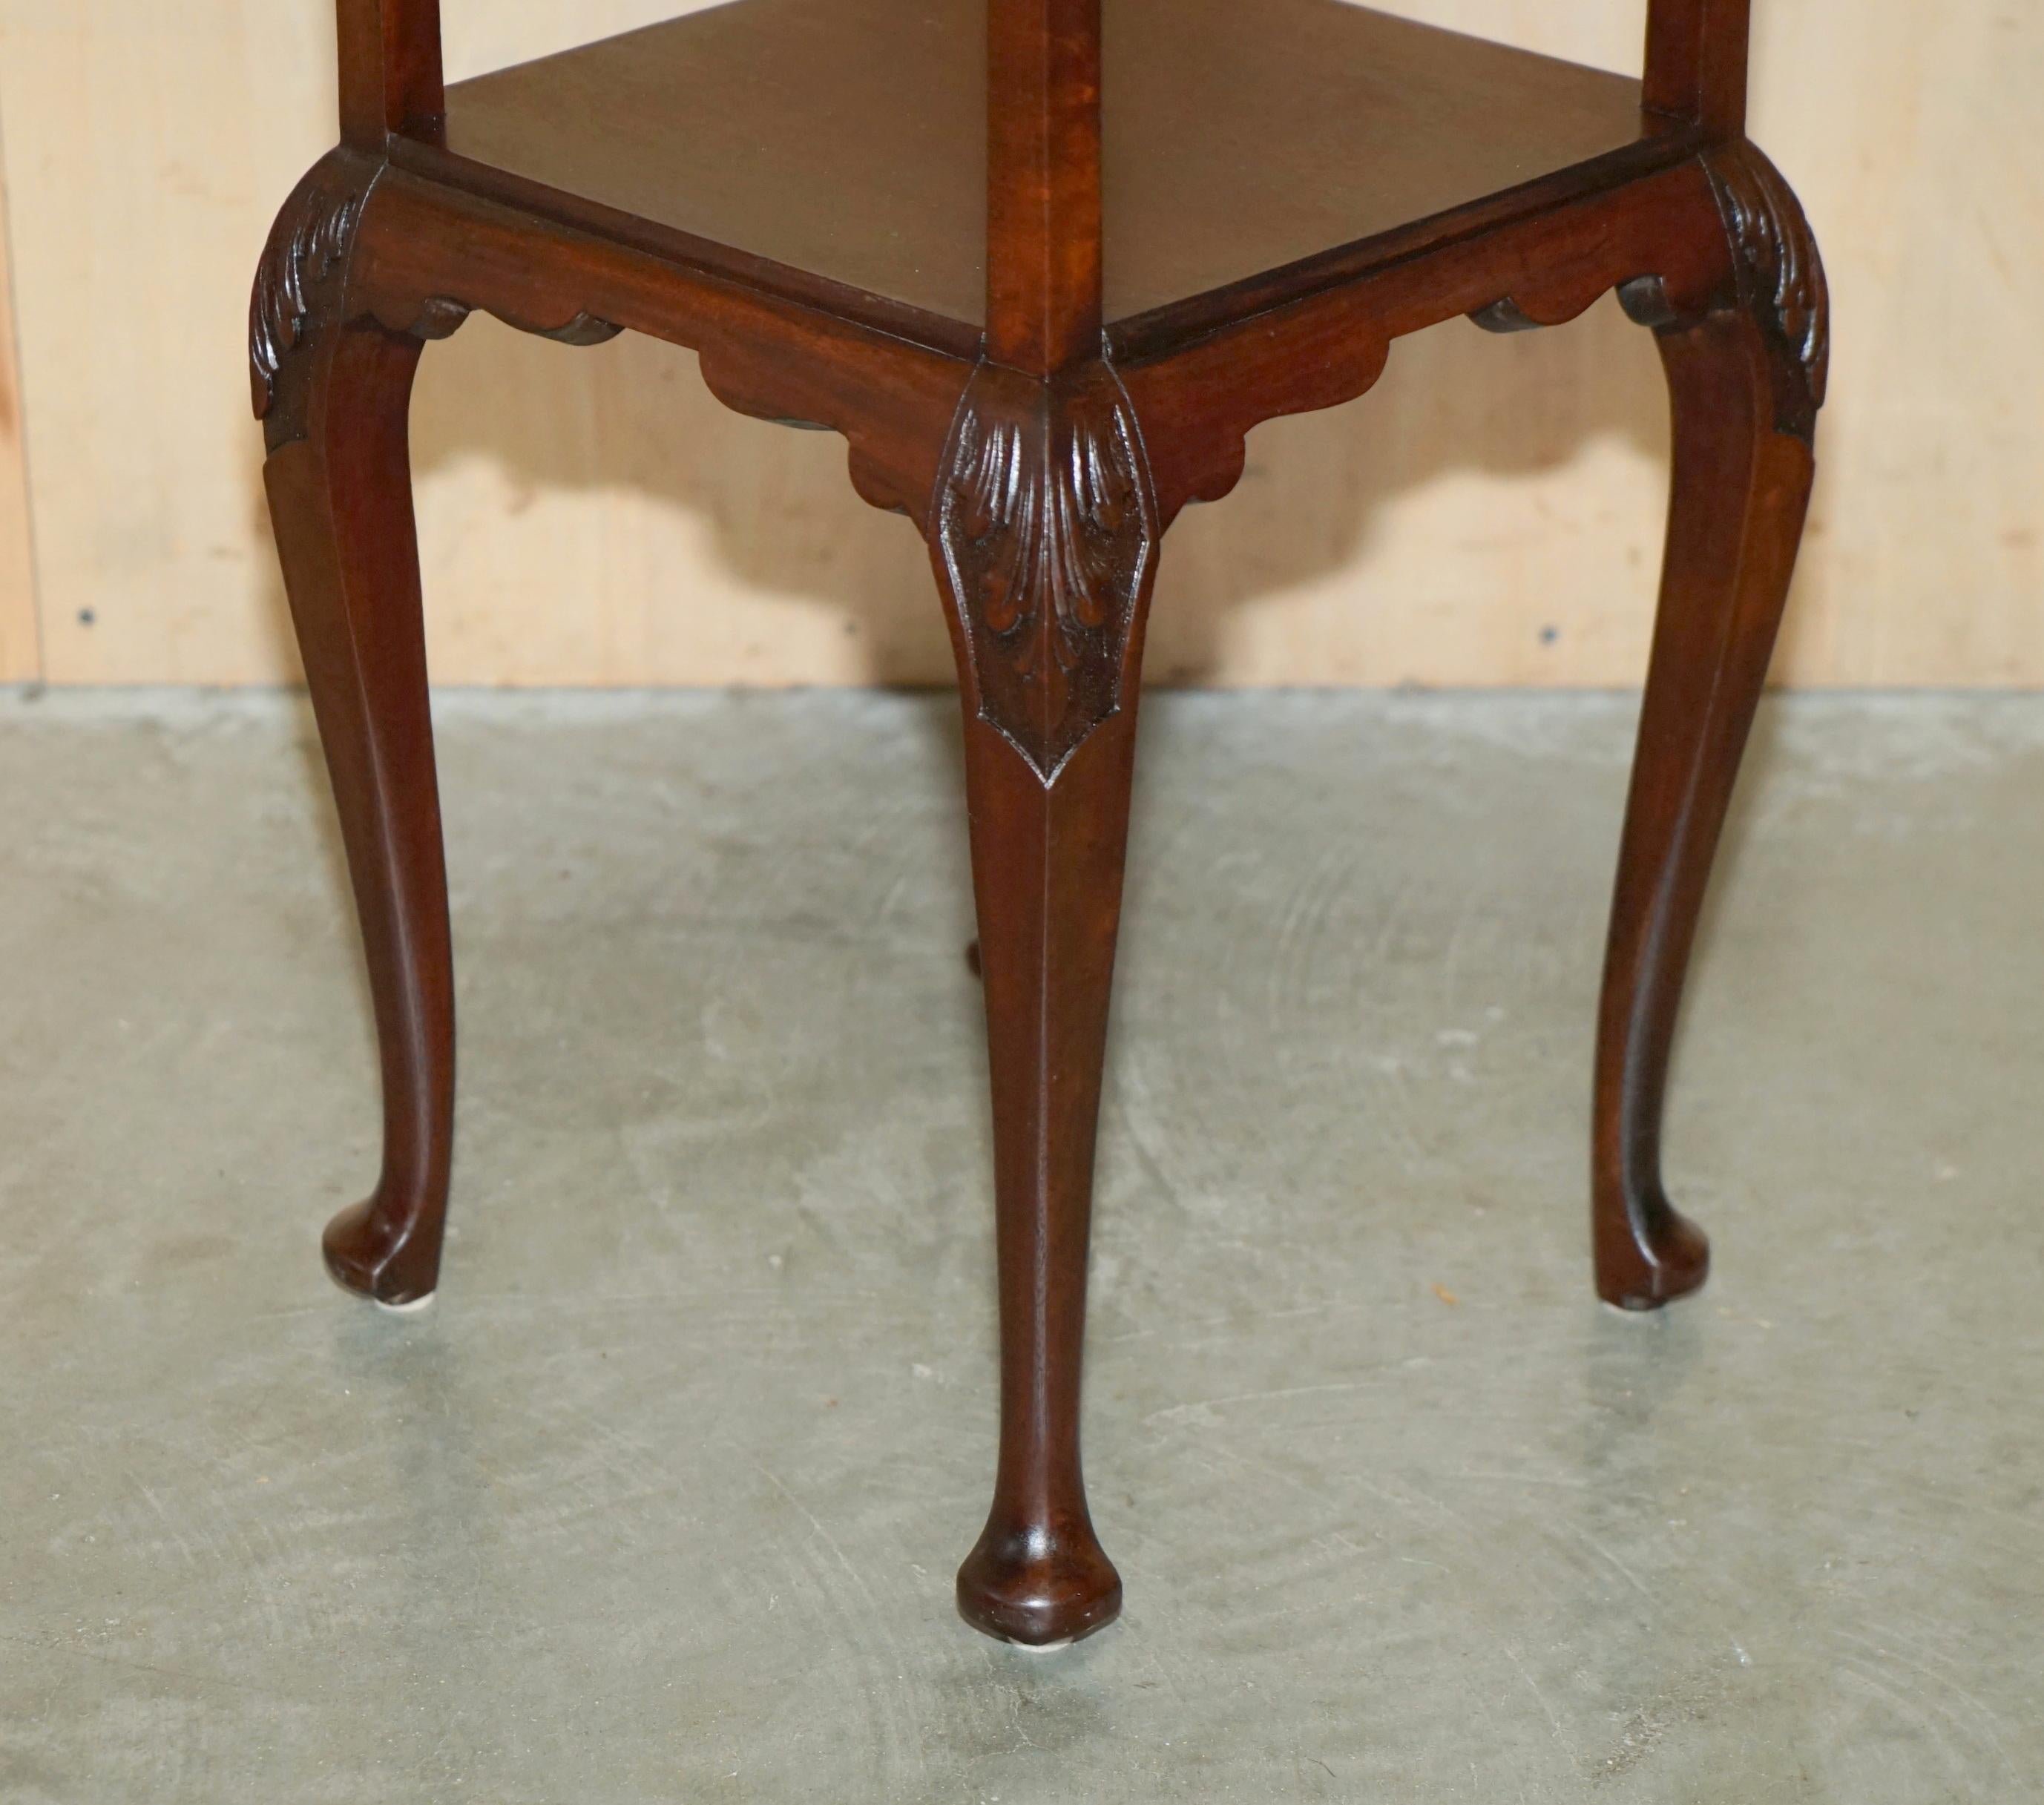 STUNNING THOMAS CHIPPENDALE Style TWO TIERED HARDWOOD SIDE END TABLEs im Angebot 3